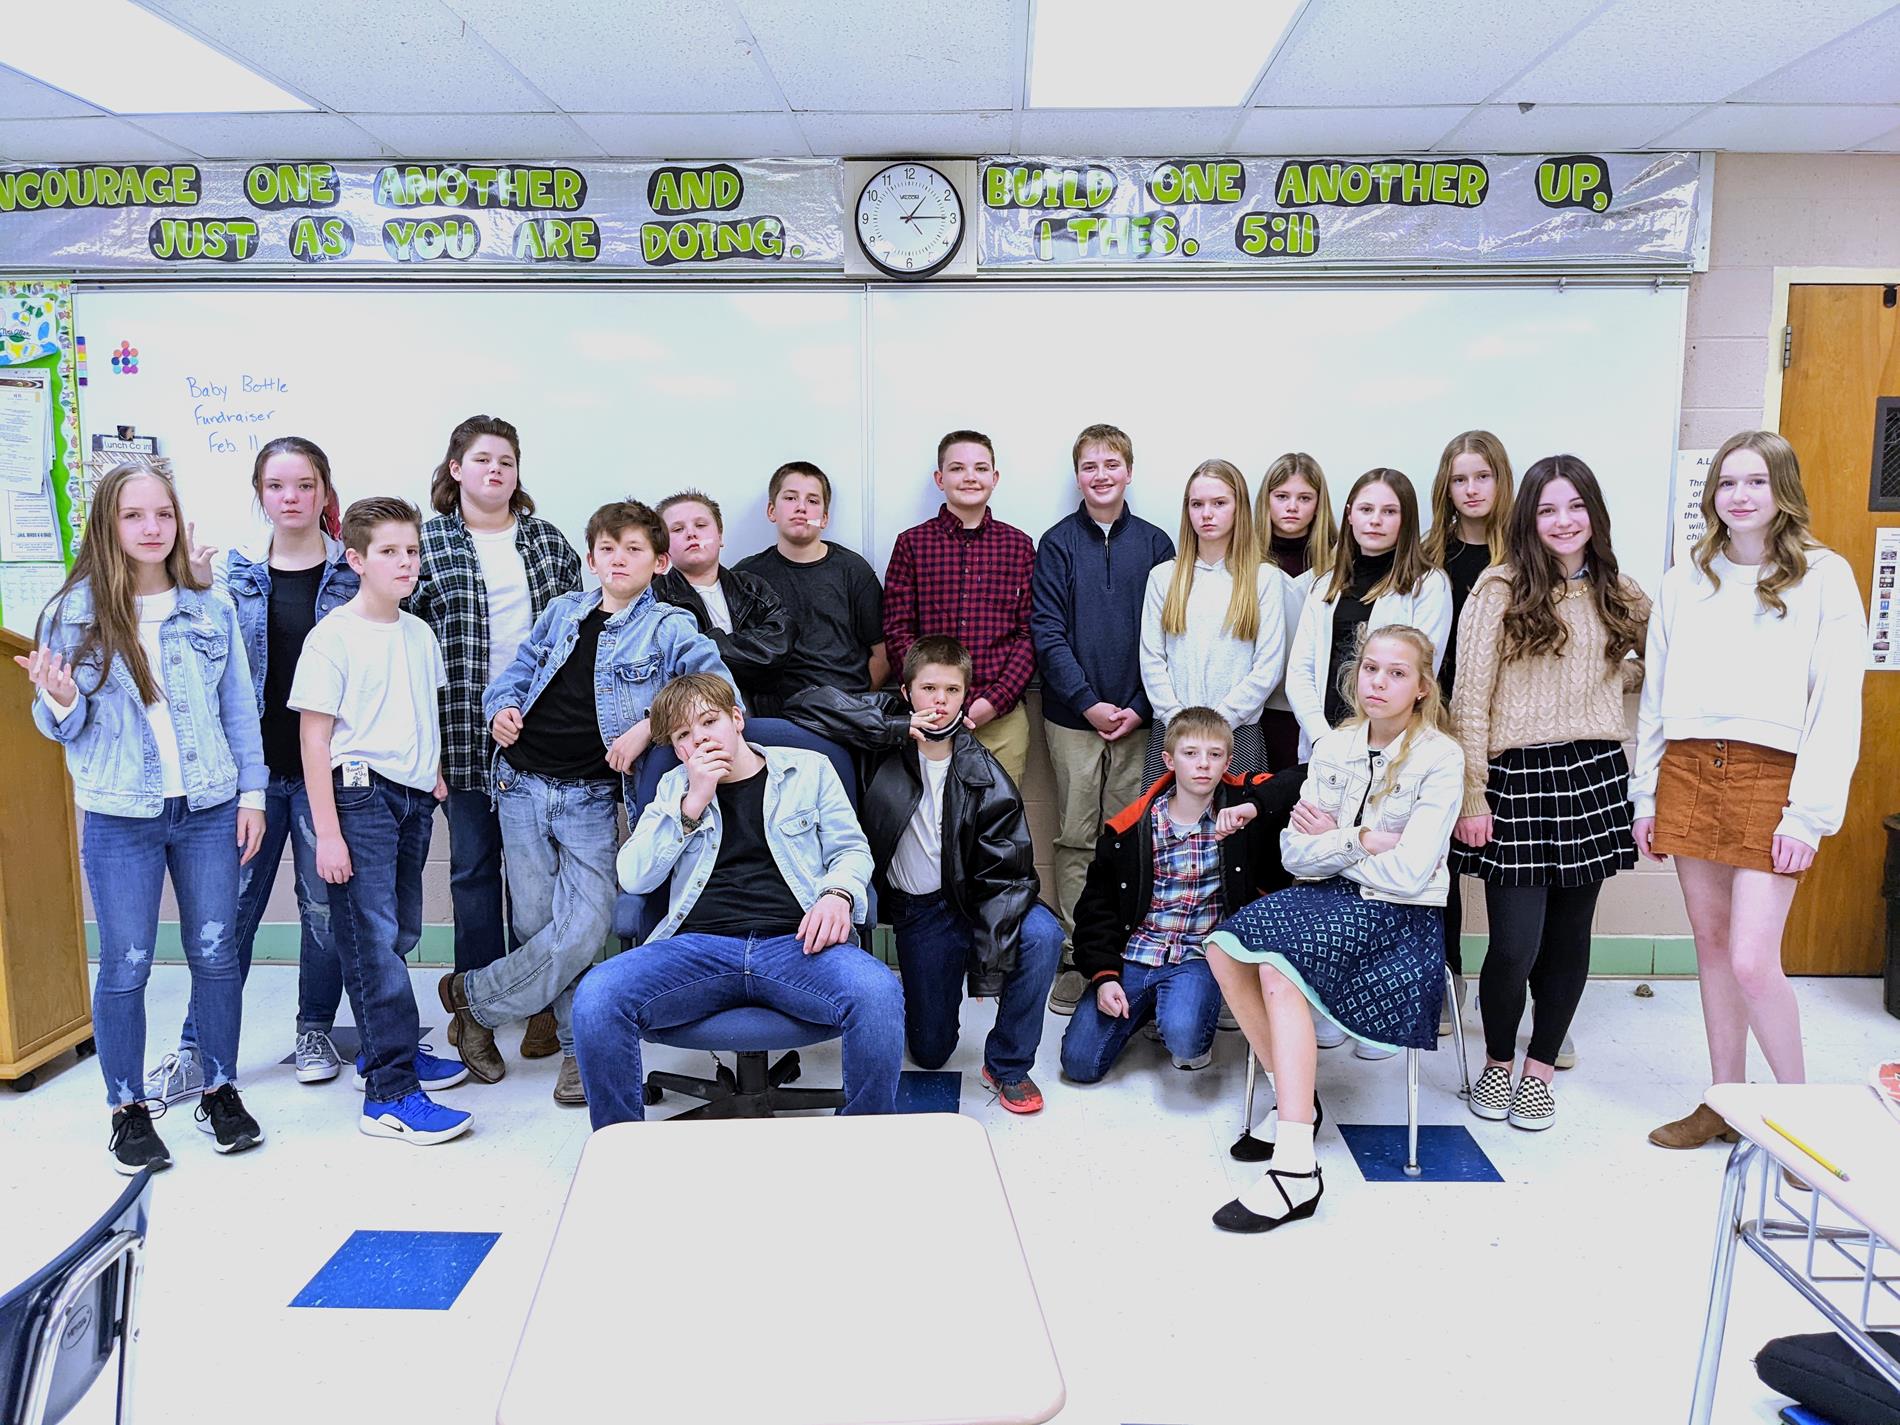 Middle school students dressed as characters from the book, "The Outsiders".